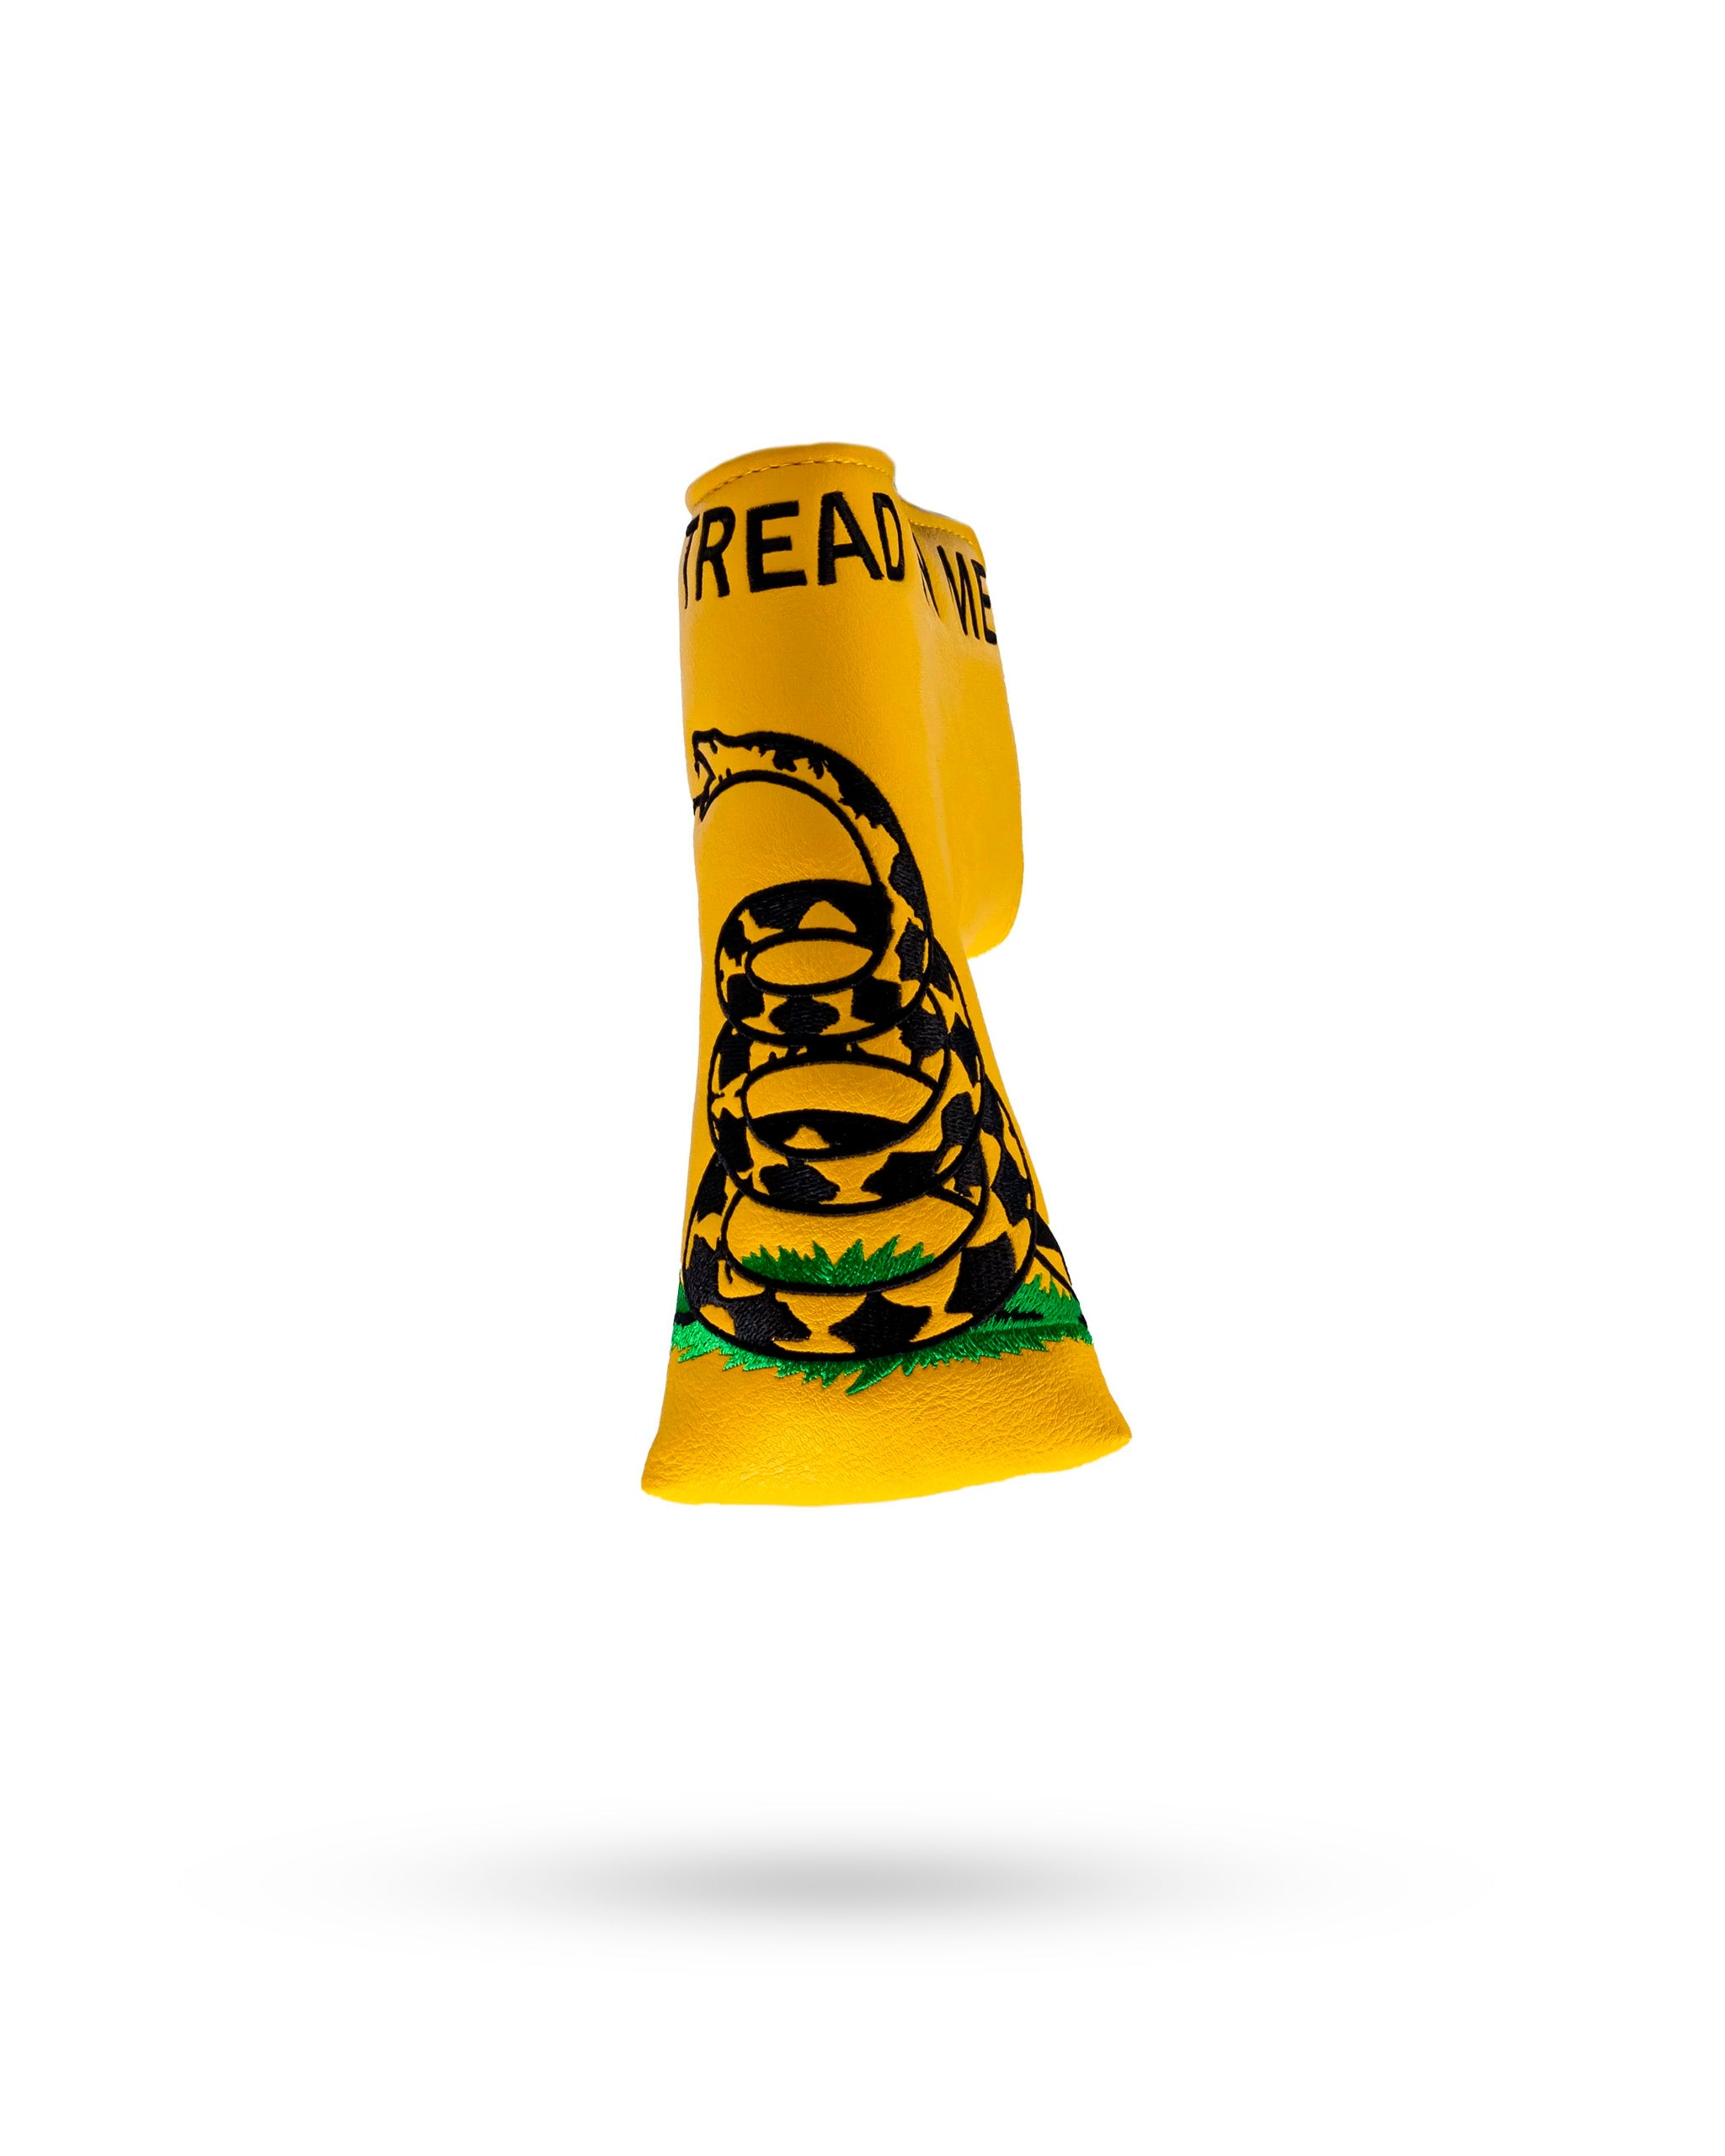 Don't Tread on Me - Blade Putter Cover